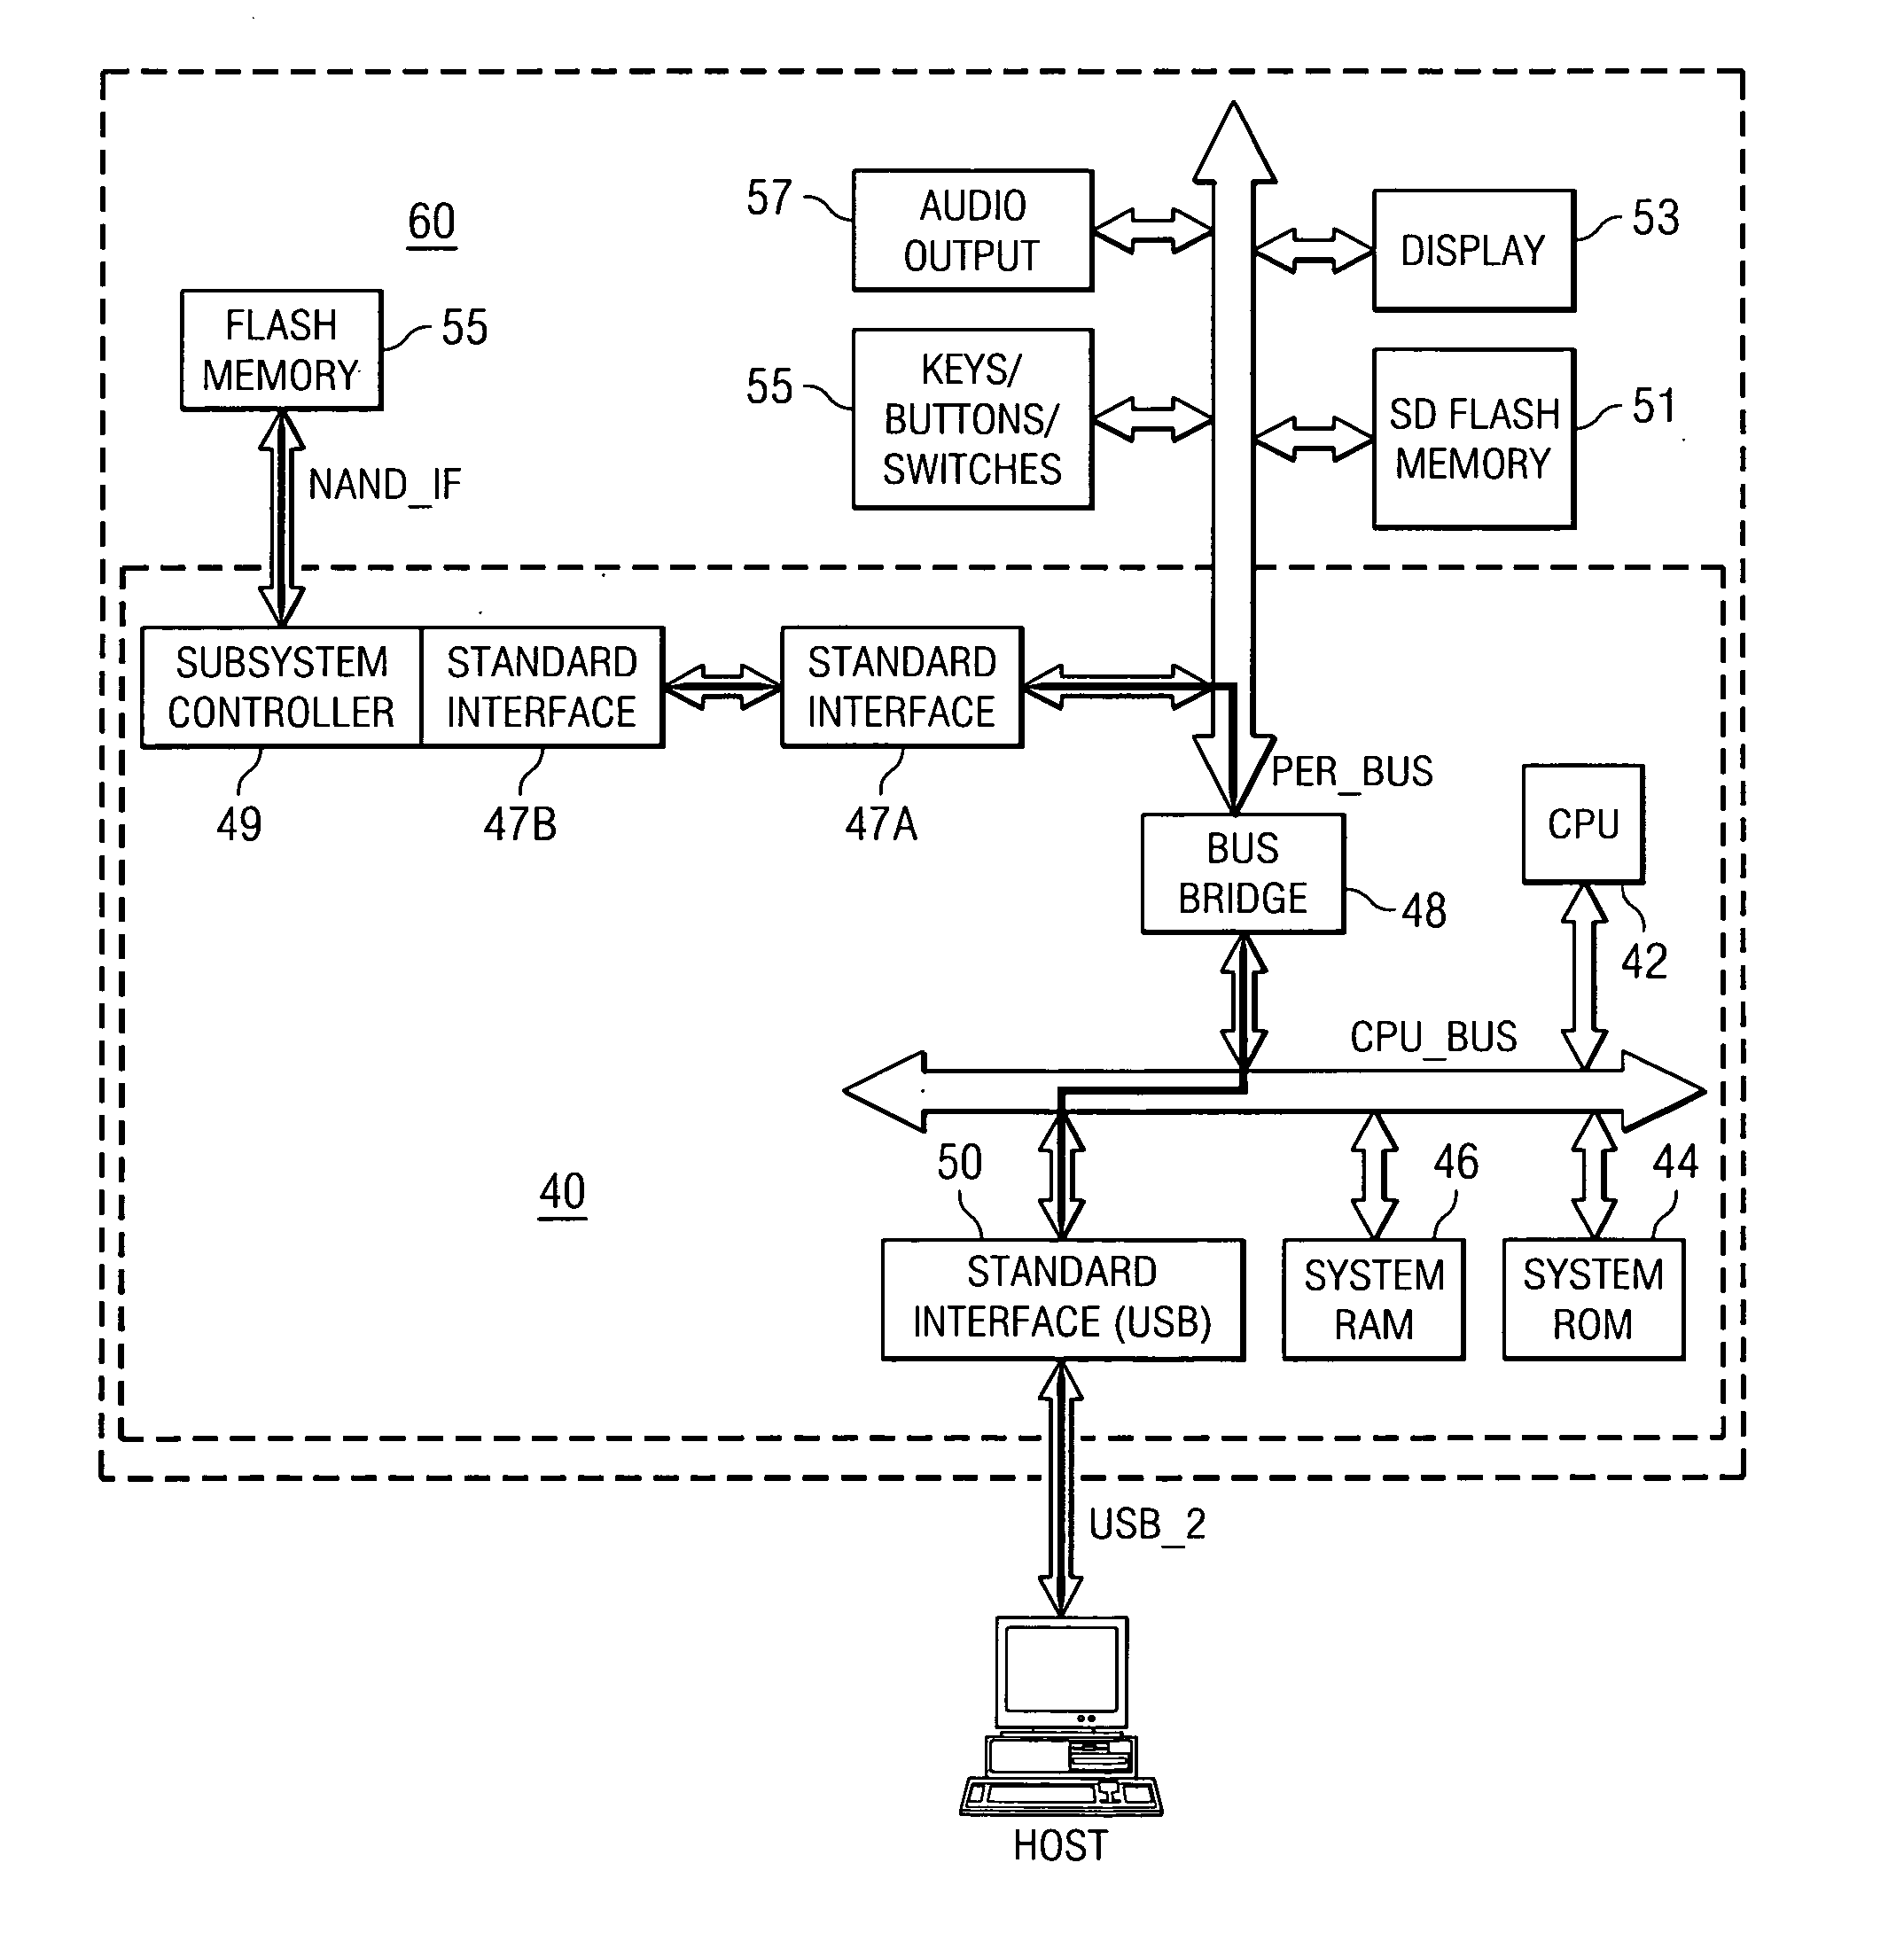 Initialization of flash storage via an embedded controller